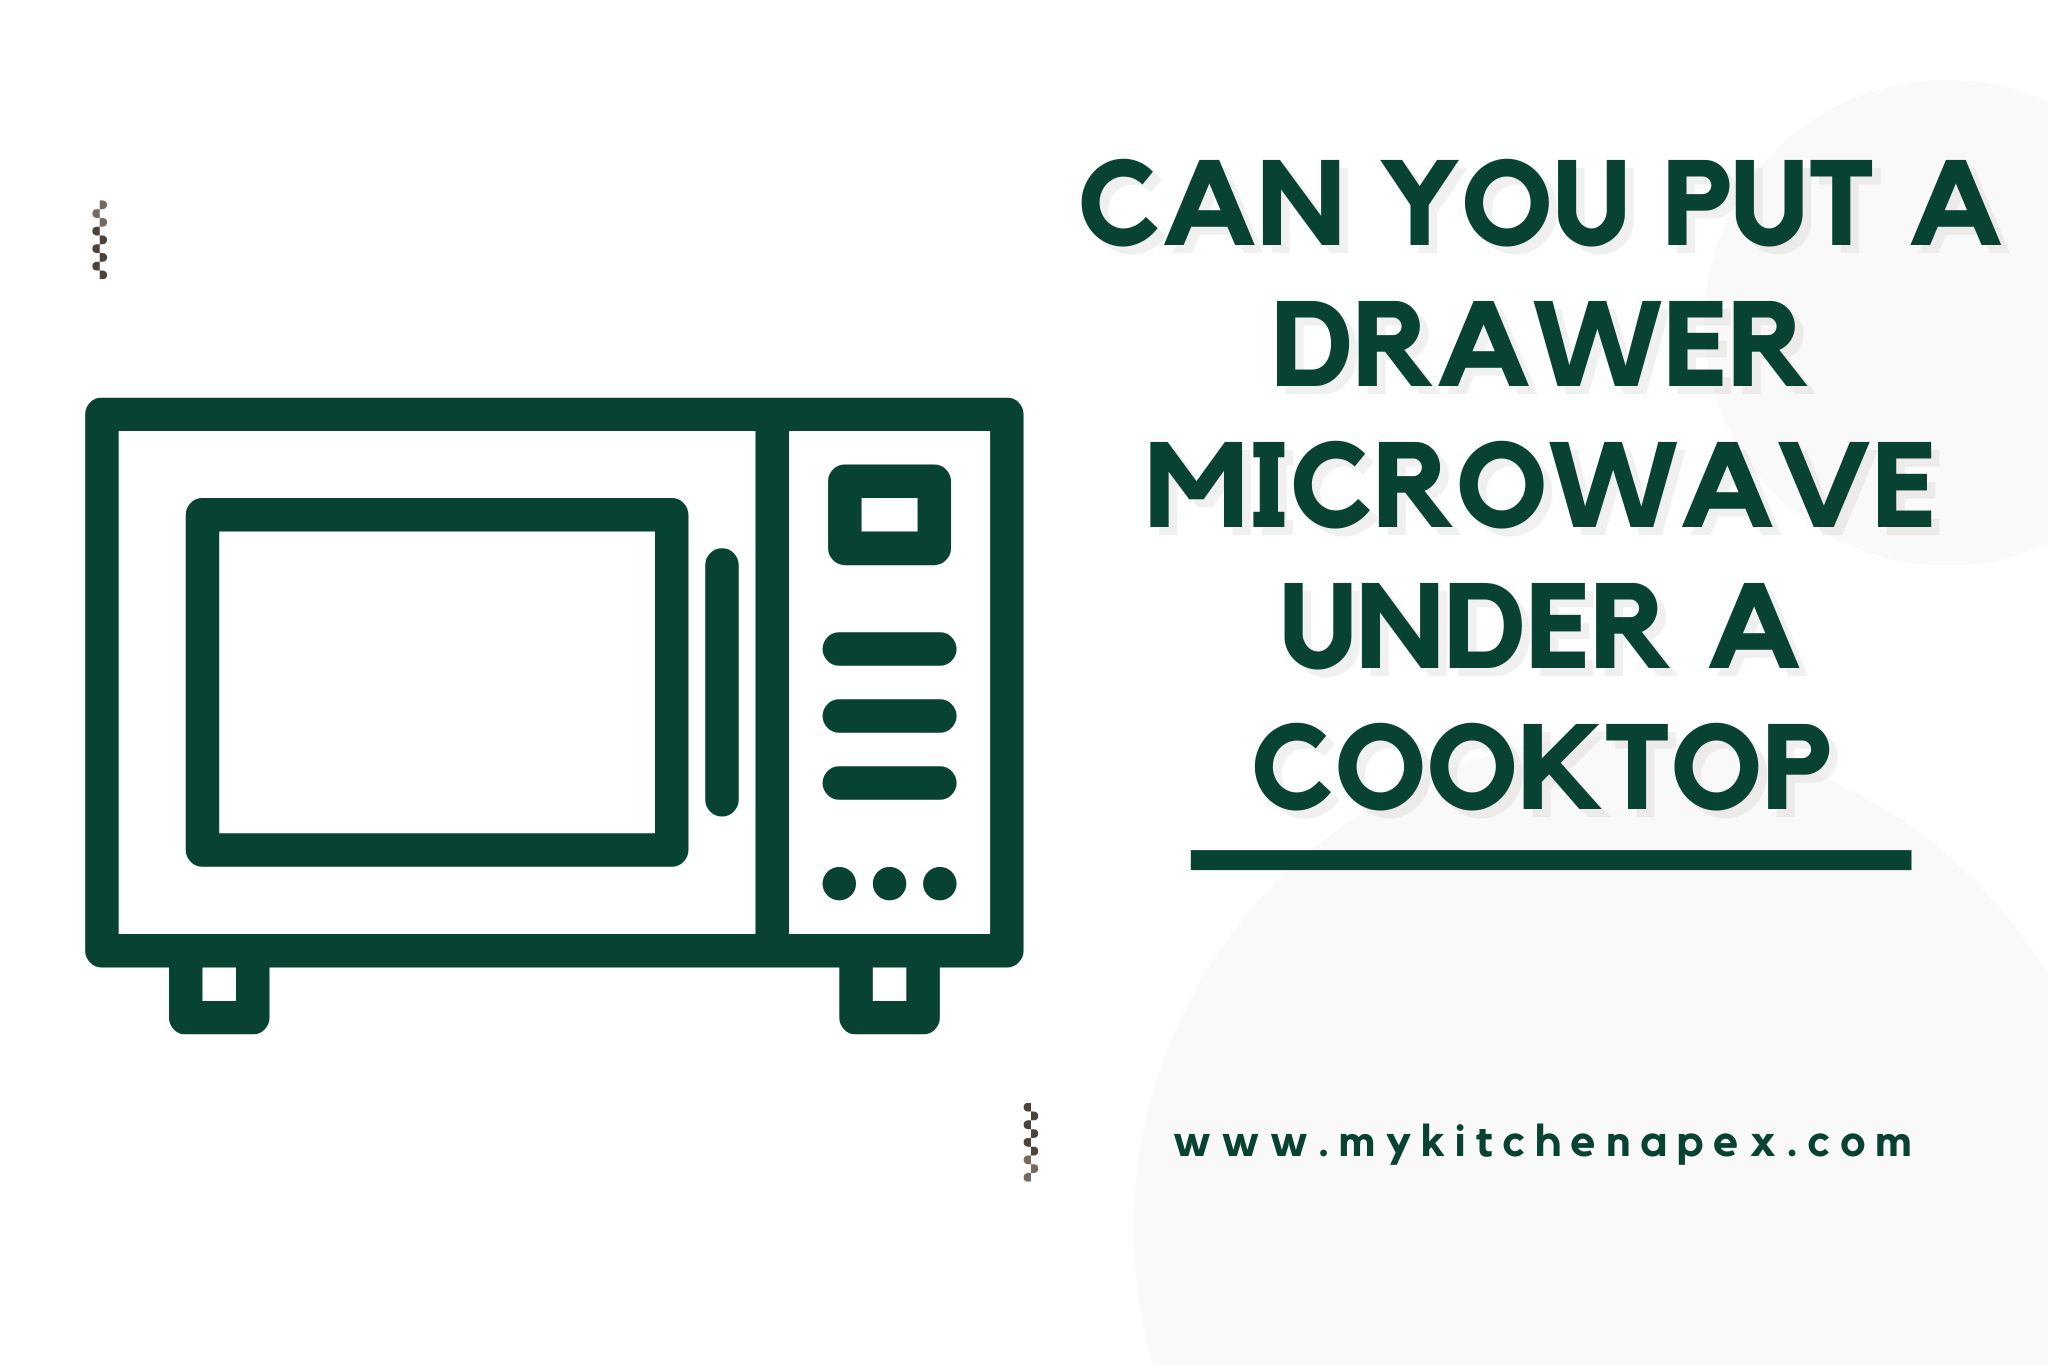 can you put a drawer microwave under a cooktop